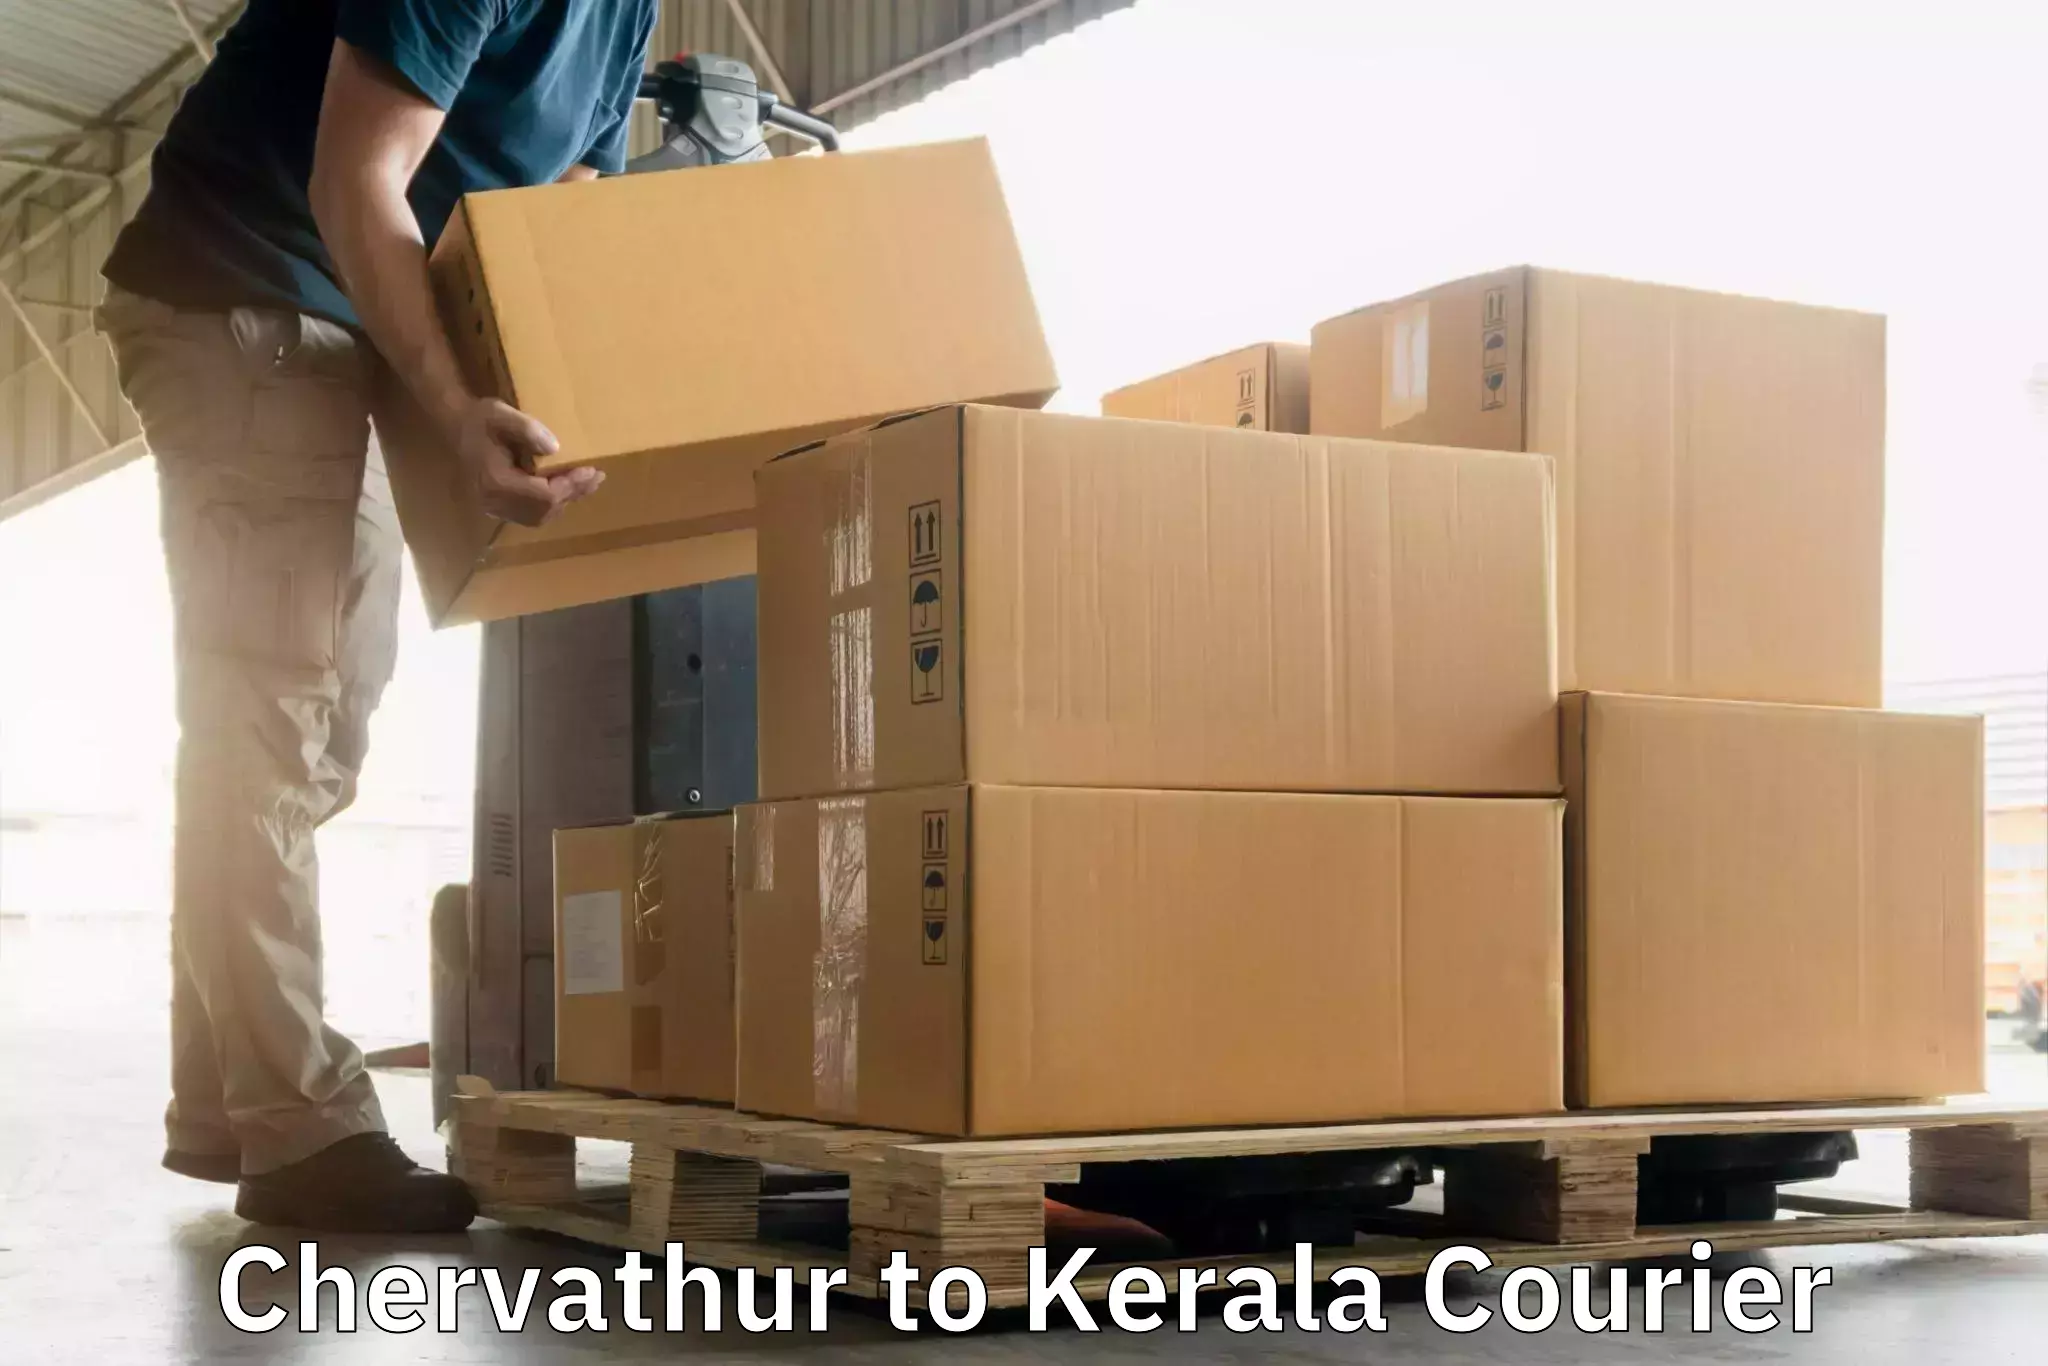 End-to-end delivery Chervathur to Irinjalakuda